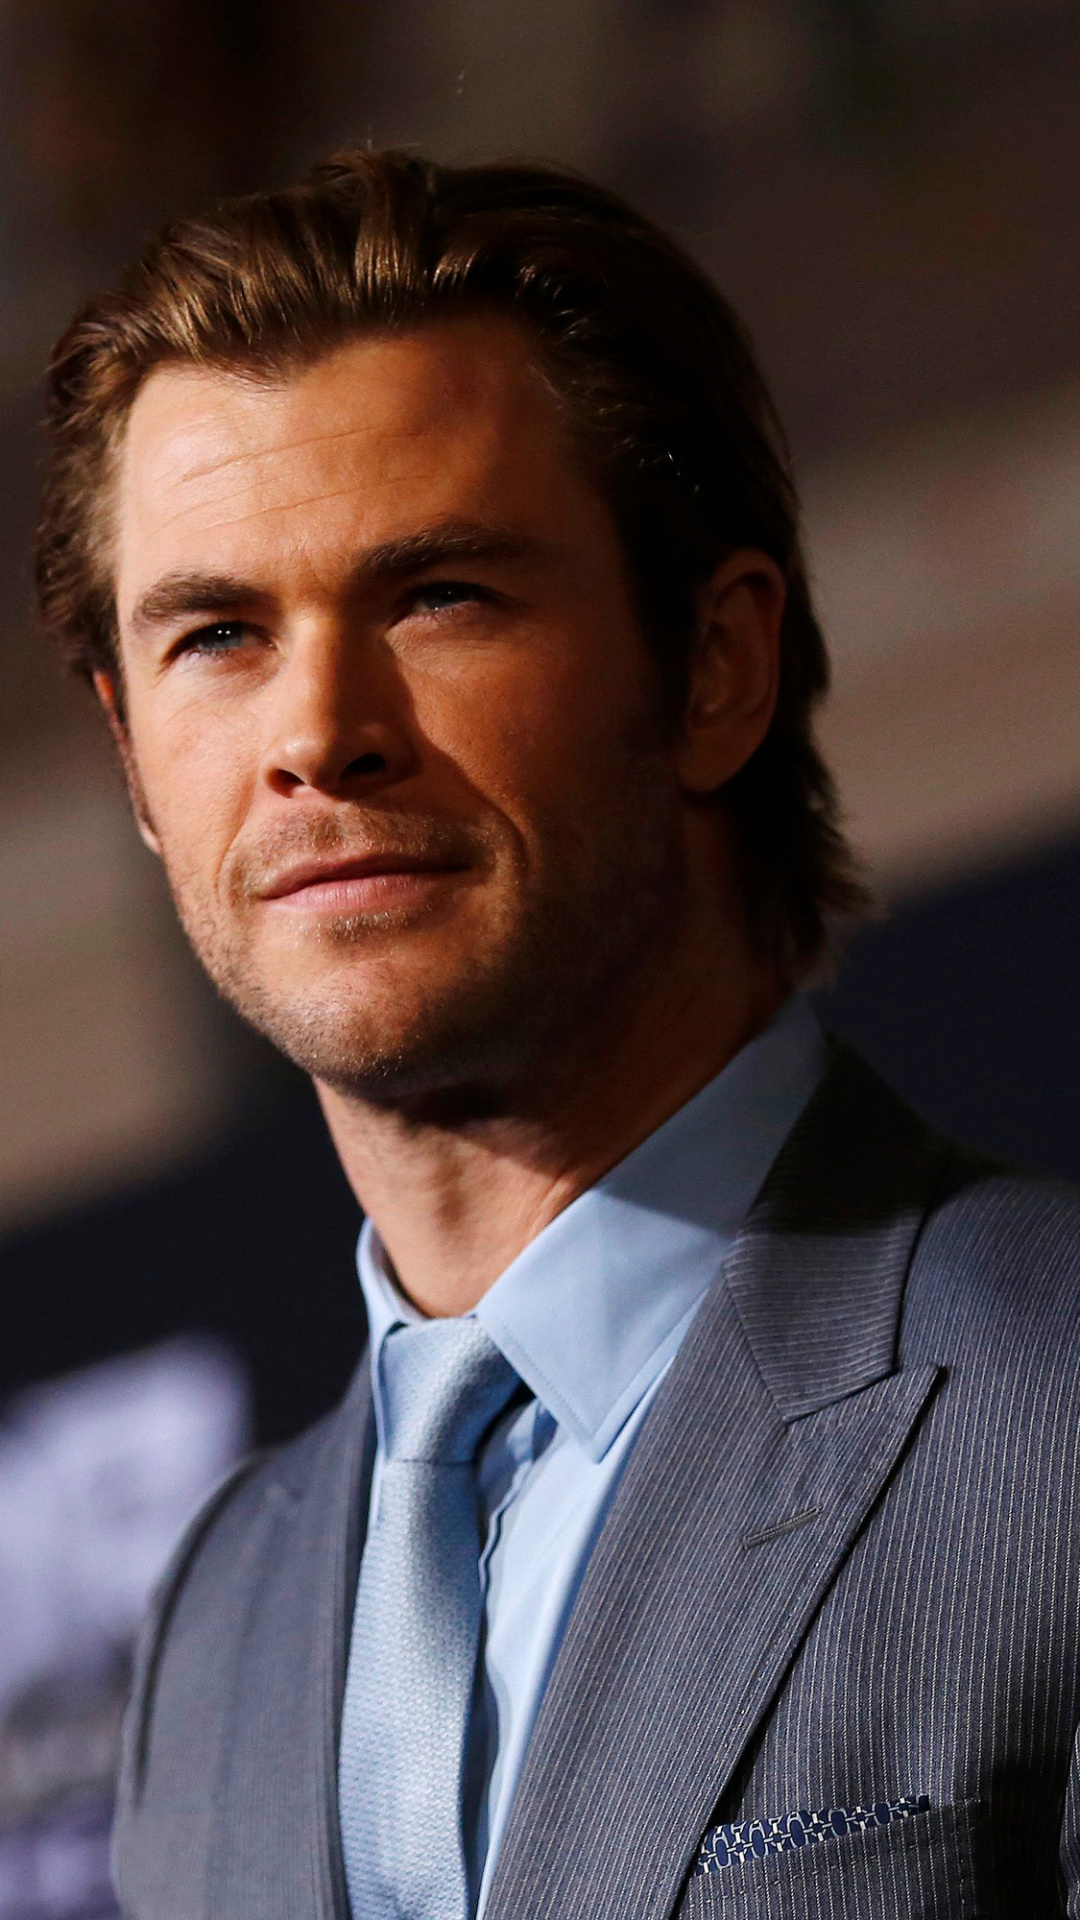 Chris Hemsworth: Ranked 31st in the magazine's list of Highest Paid Celebrities in 2018. 1080x1920 Full HD Background.